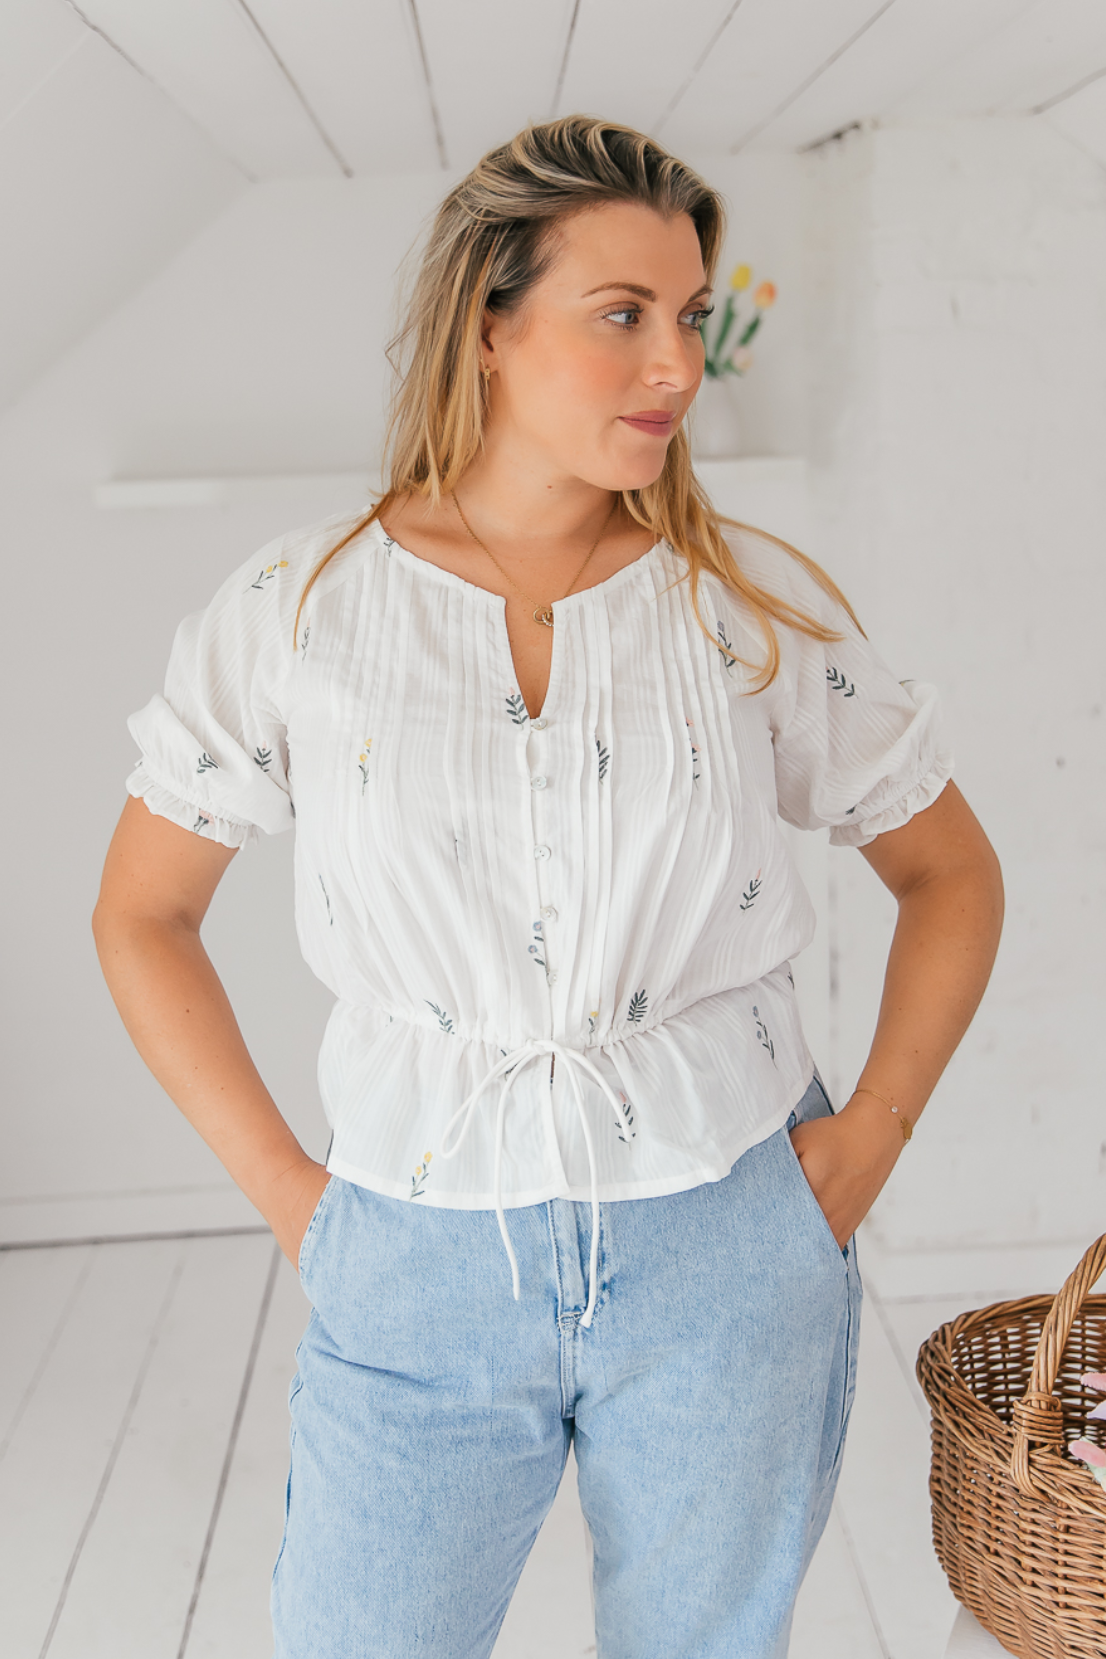 Gaby - Floral Embroidered Blouse